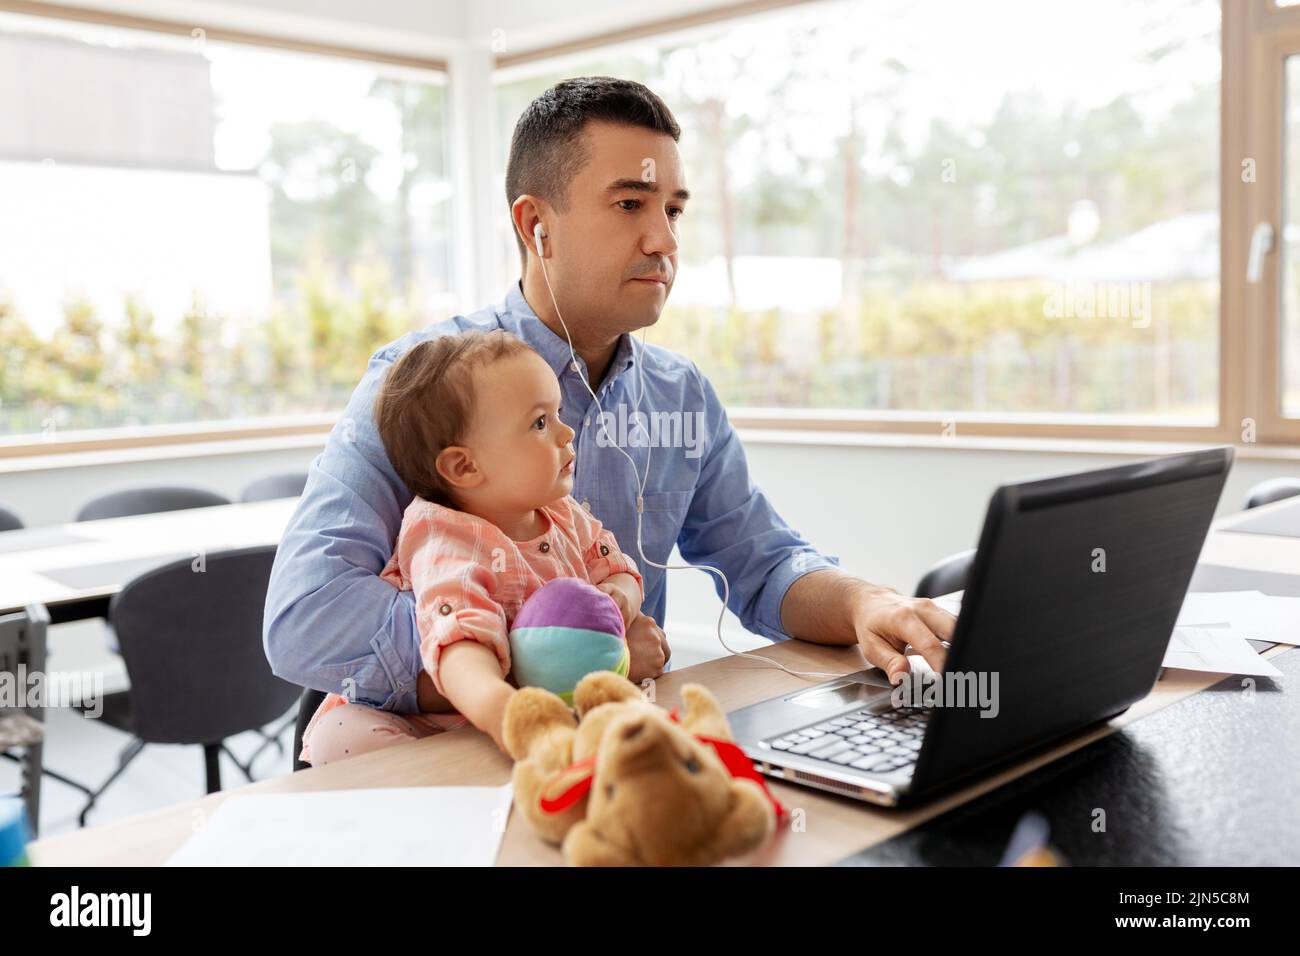 father with baby working at home office Stock Photo